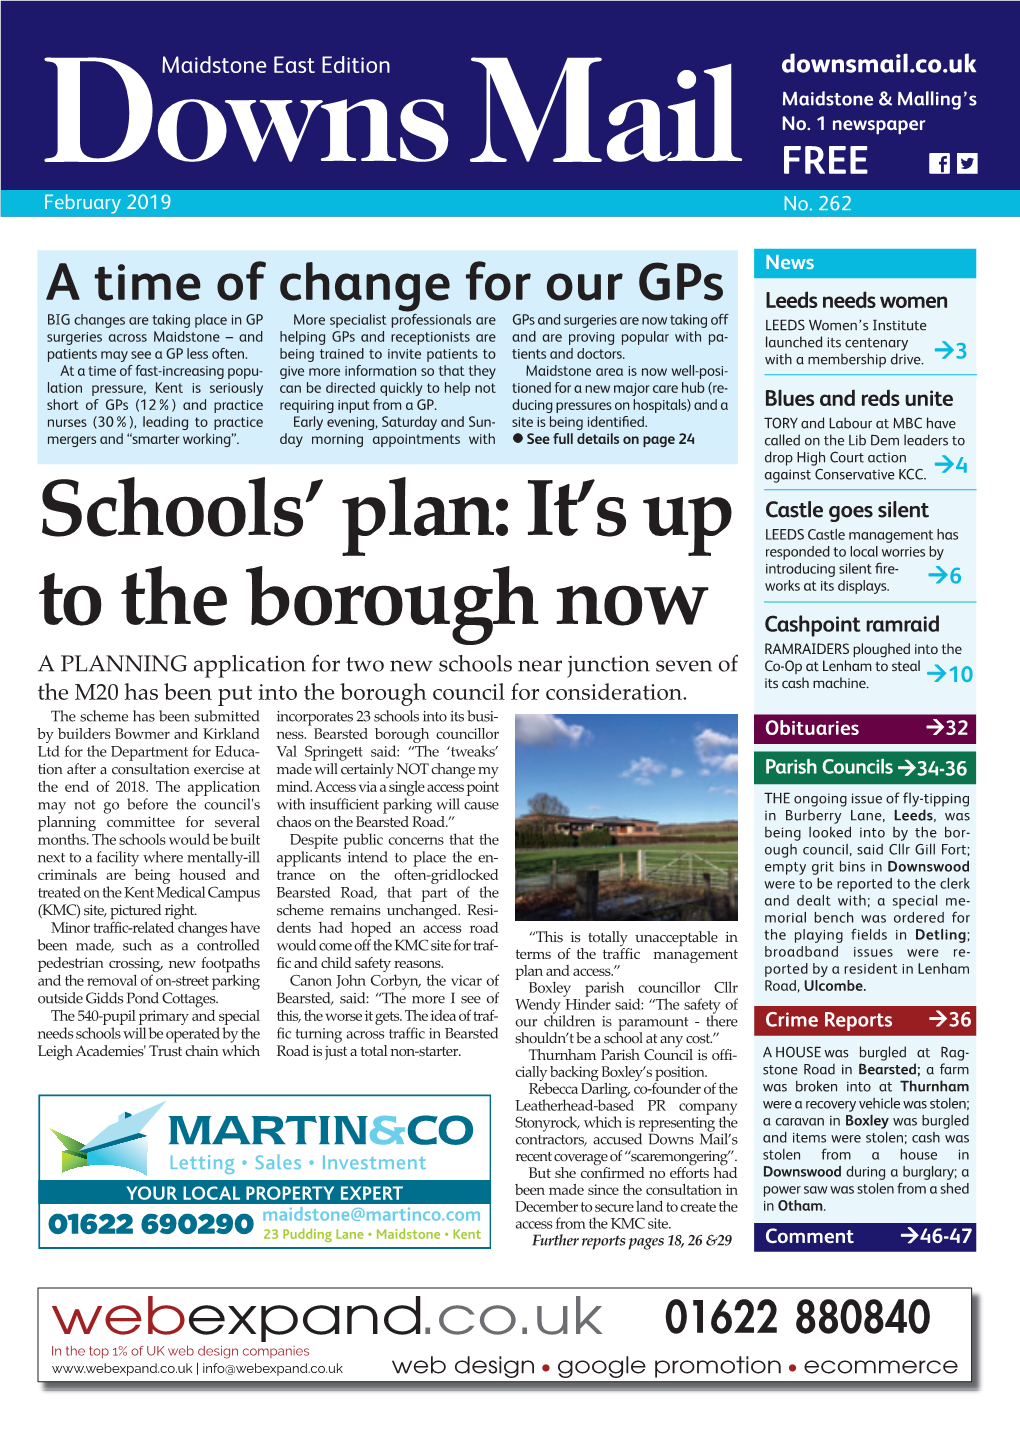 Schools' Plan: It's up to the Borough